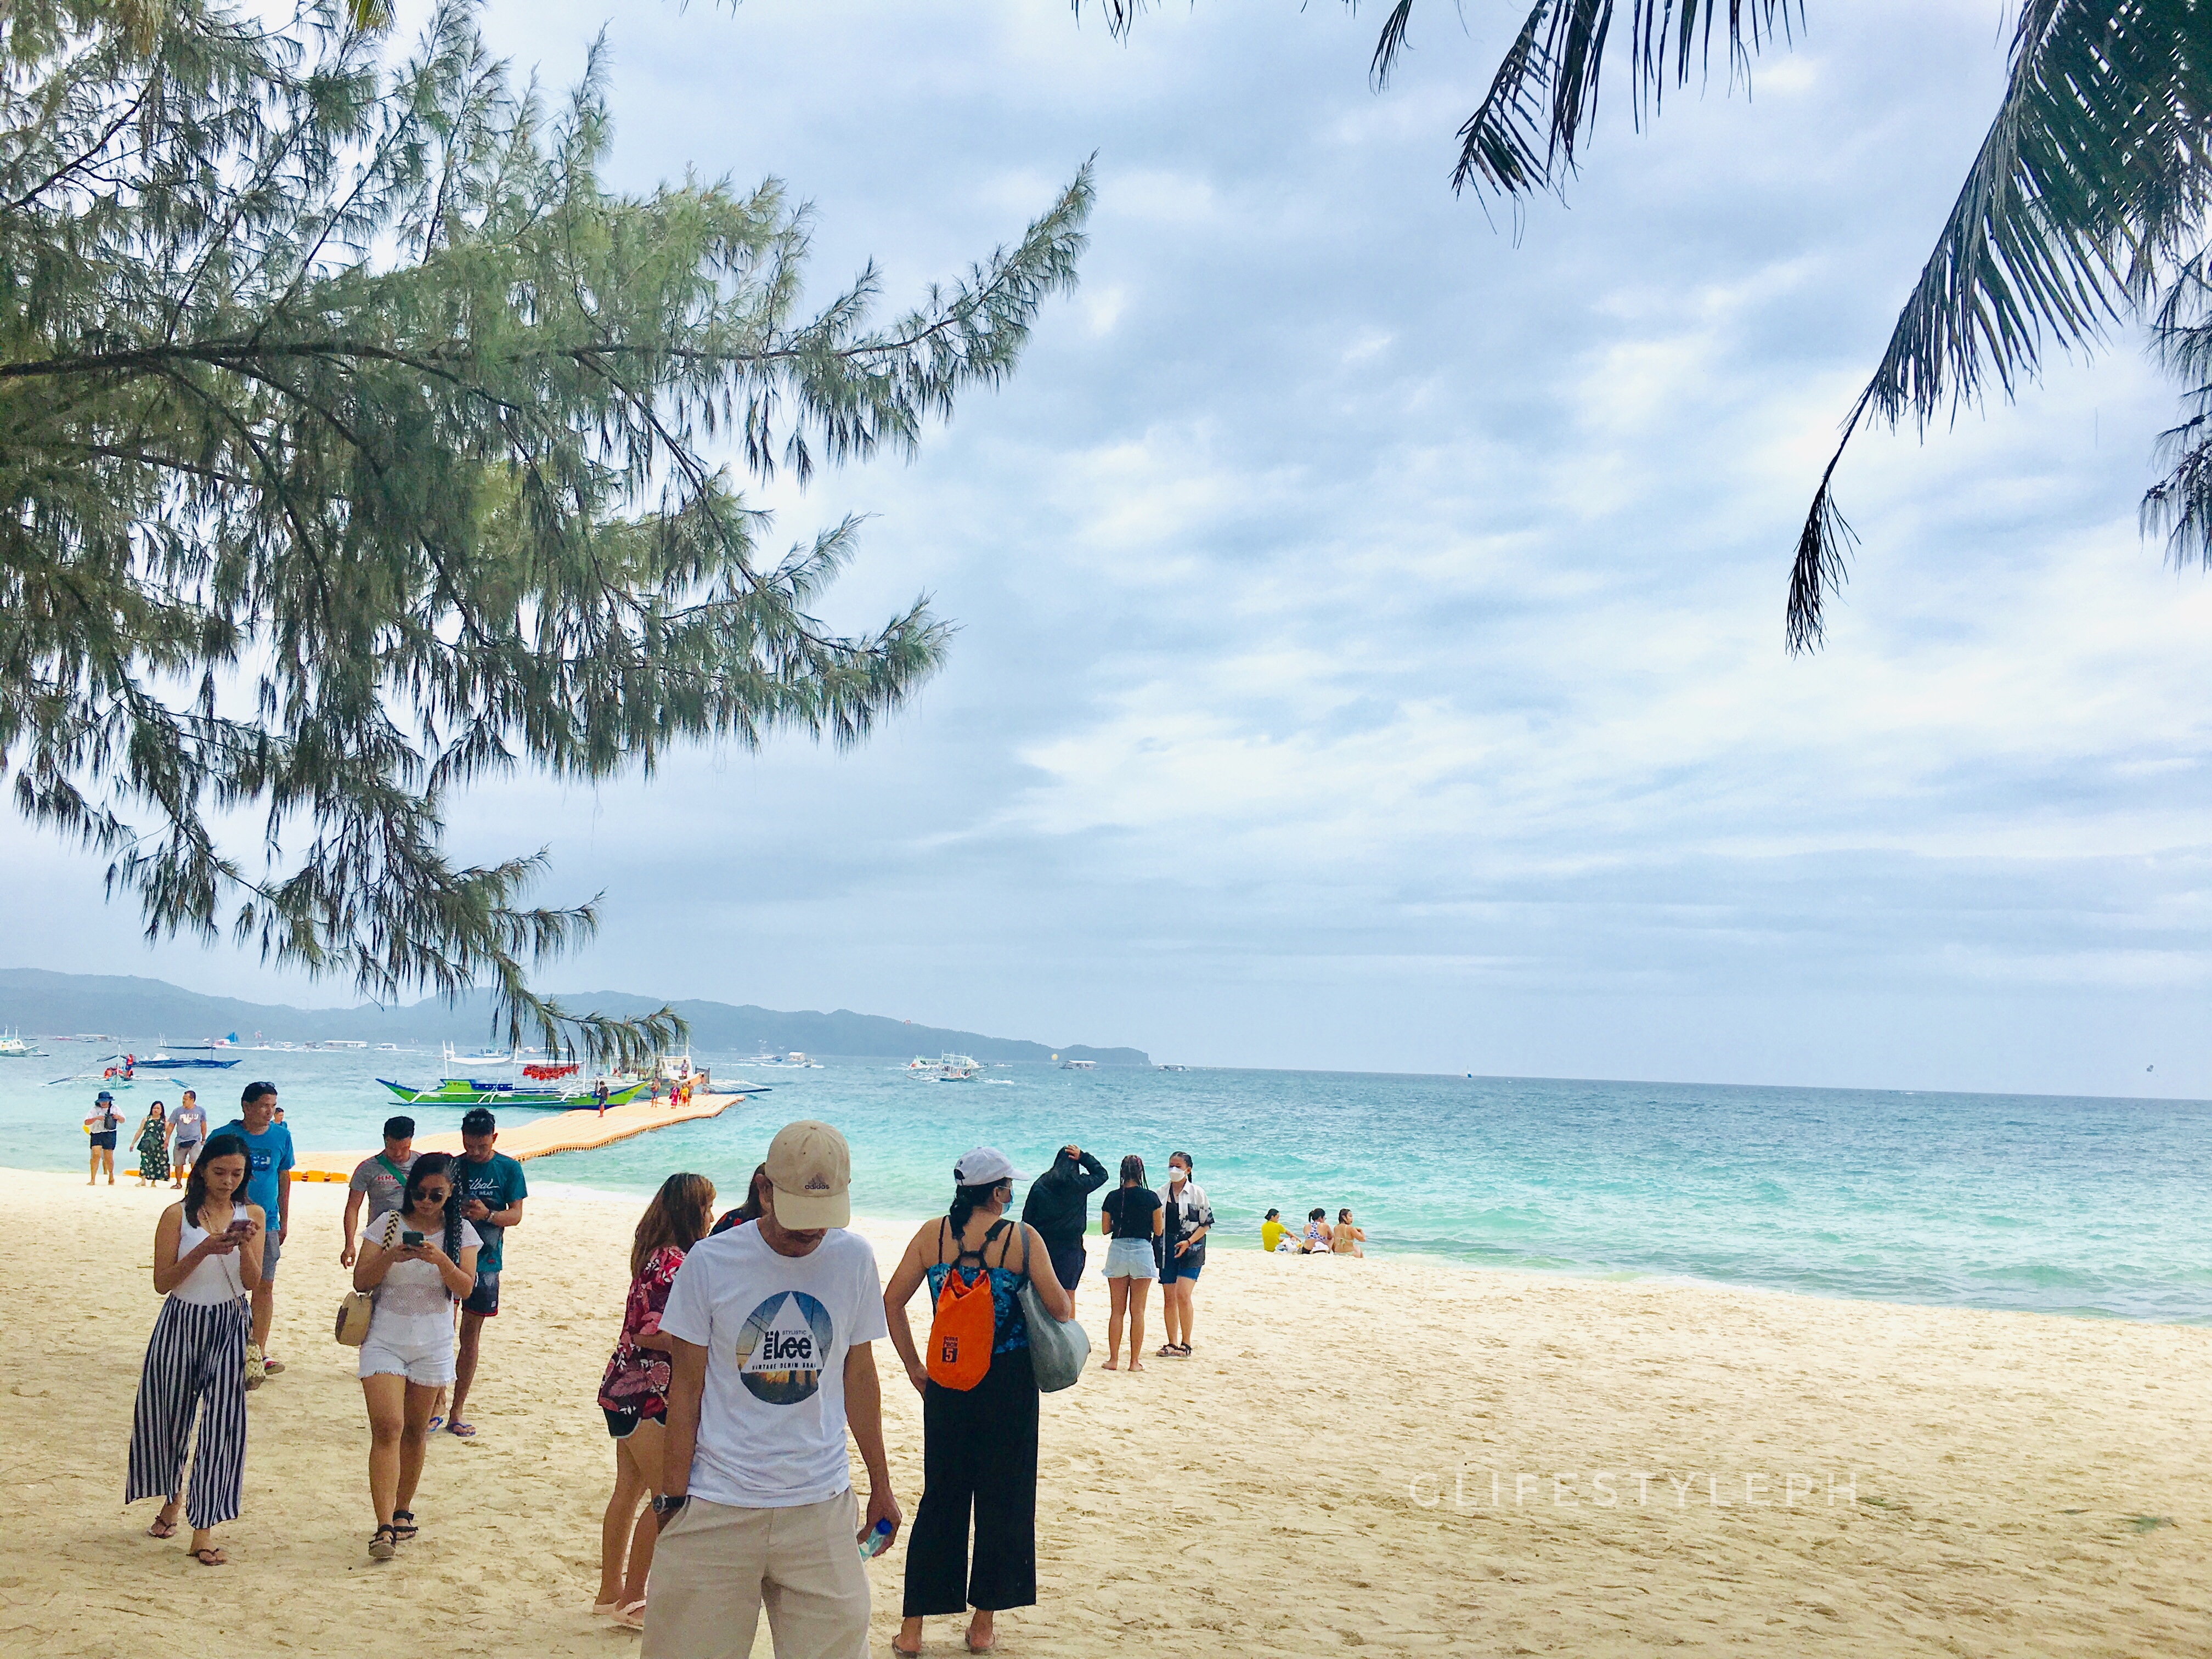 Boracay Guide 2022, Boracay Philippines 2022; Things you need to enter Boracay Island in 2022: Hotel Accomodation Confirmation Document; QR Code; Valid ID and Covid-19 Vaccine Card